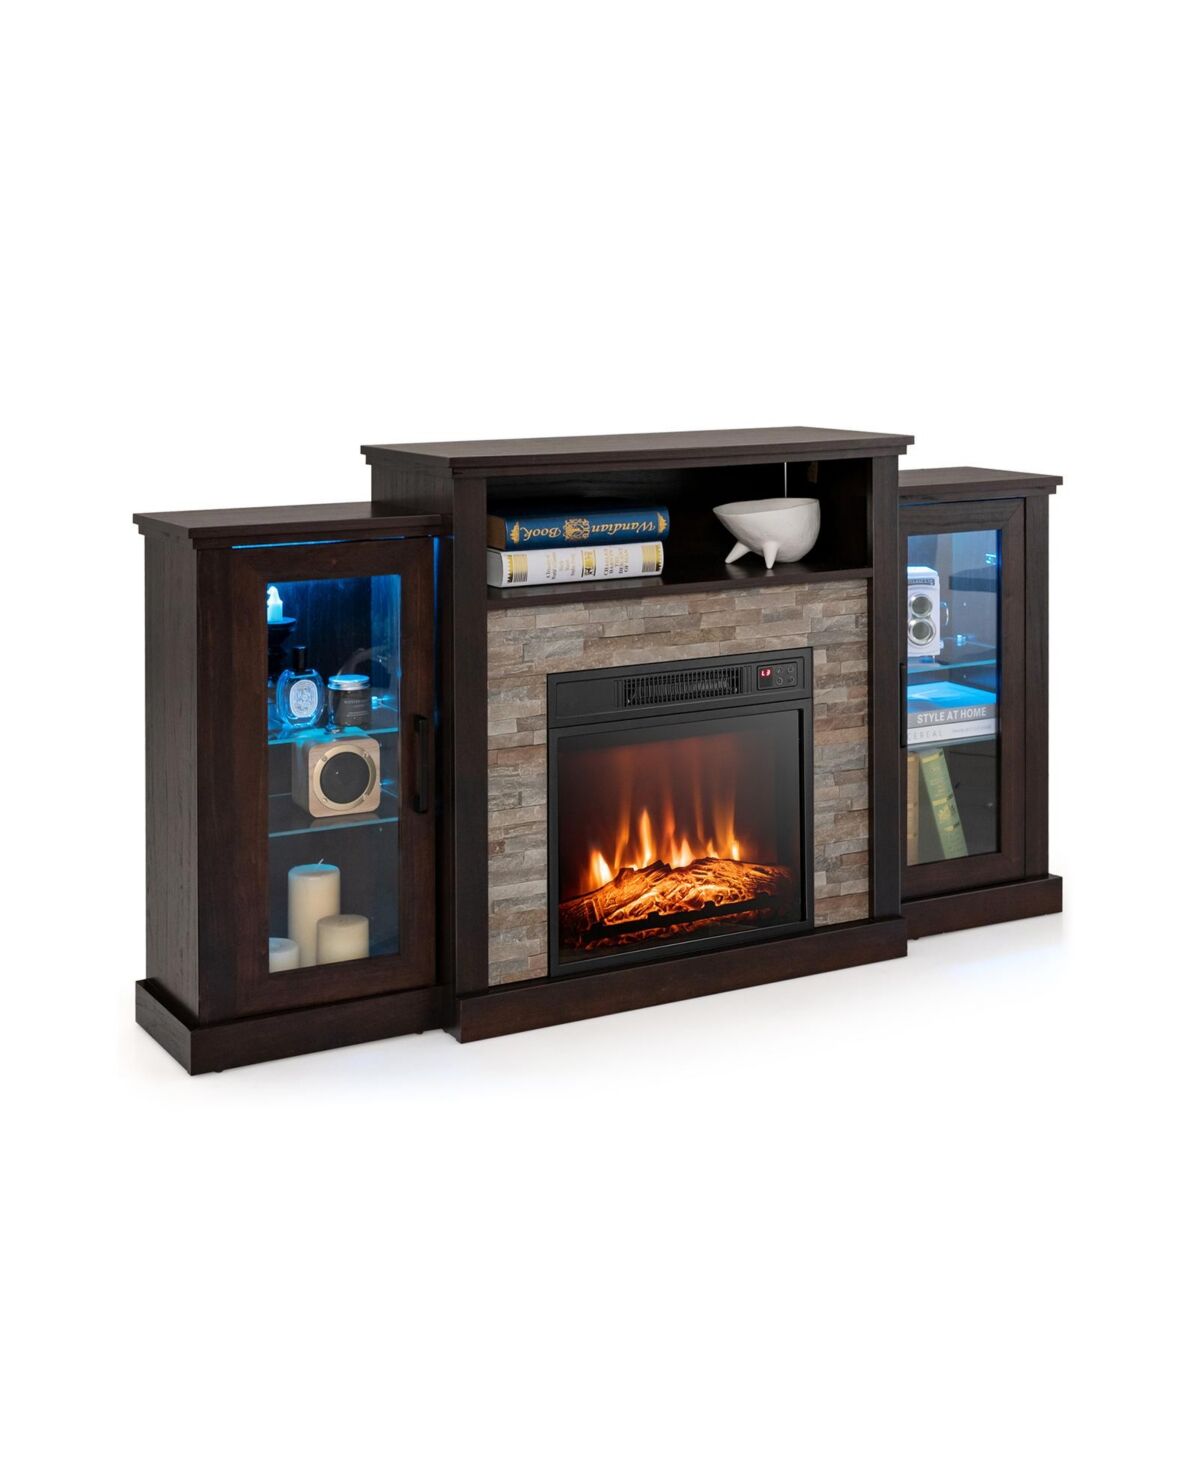 Slickblue Fireplace Tv Stand with 16-Color Led Lights for TVs up to 65 Inch - Dark brown